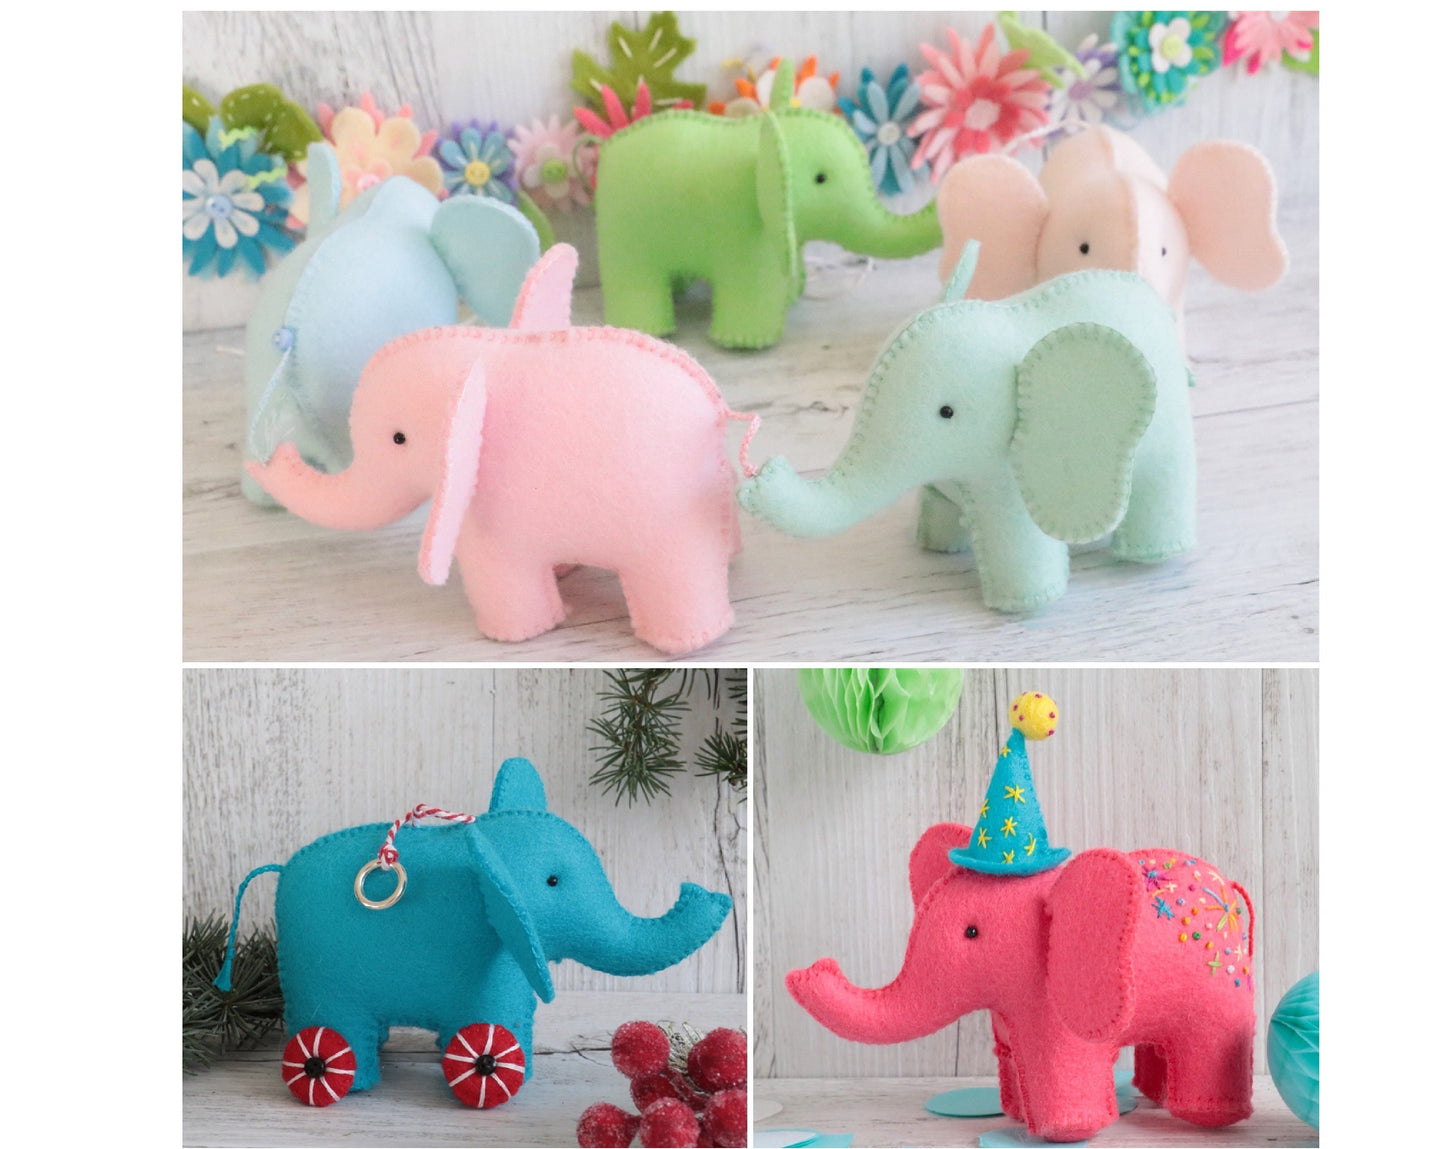 Lovely Elephant Decor Template- With Instructions